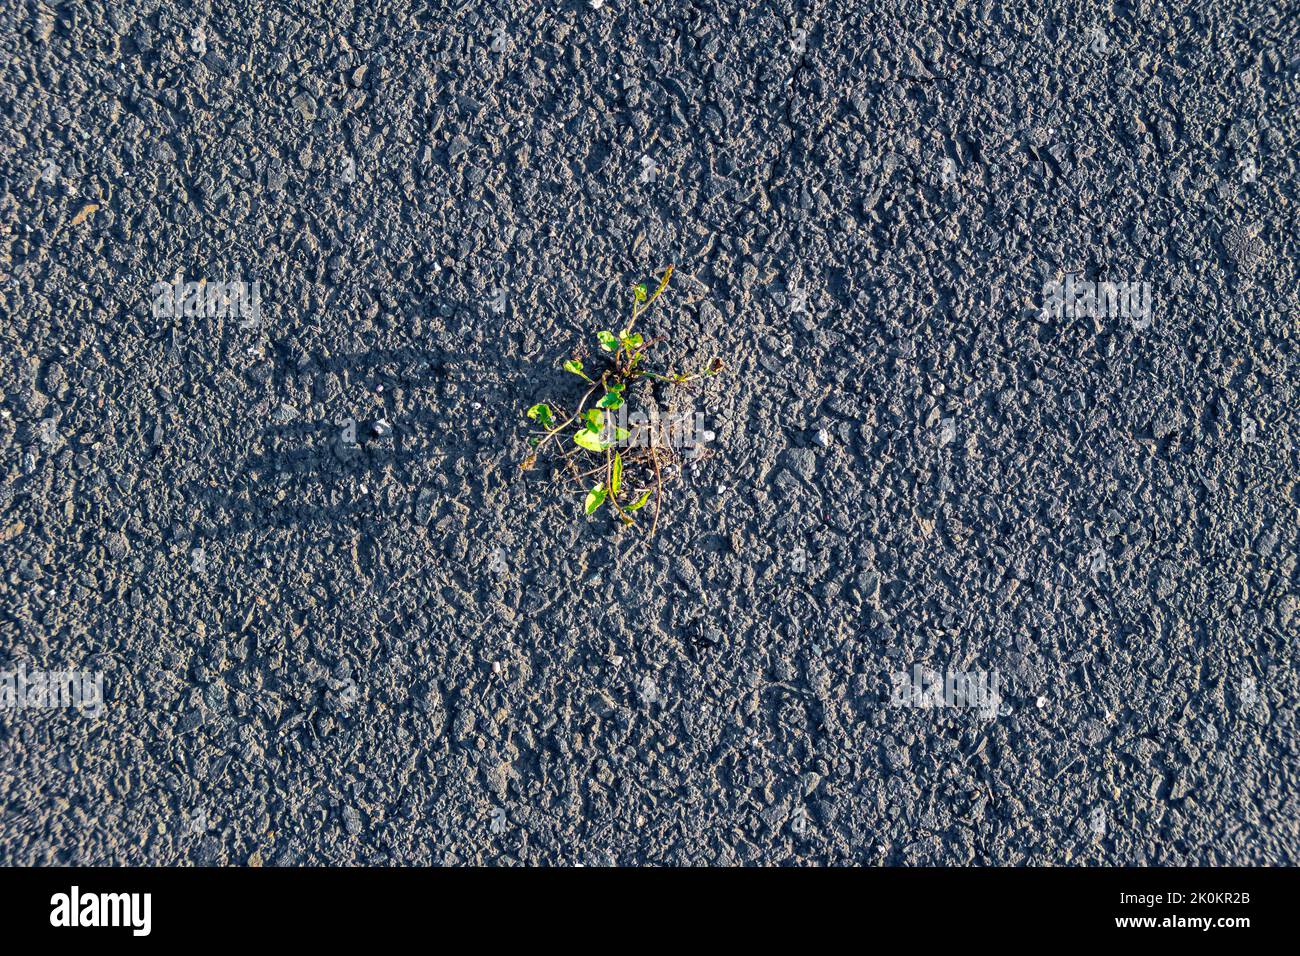 the life force of the plant breaks through green leaves through the laid new road surface, selective focus Stock Photo